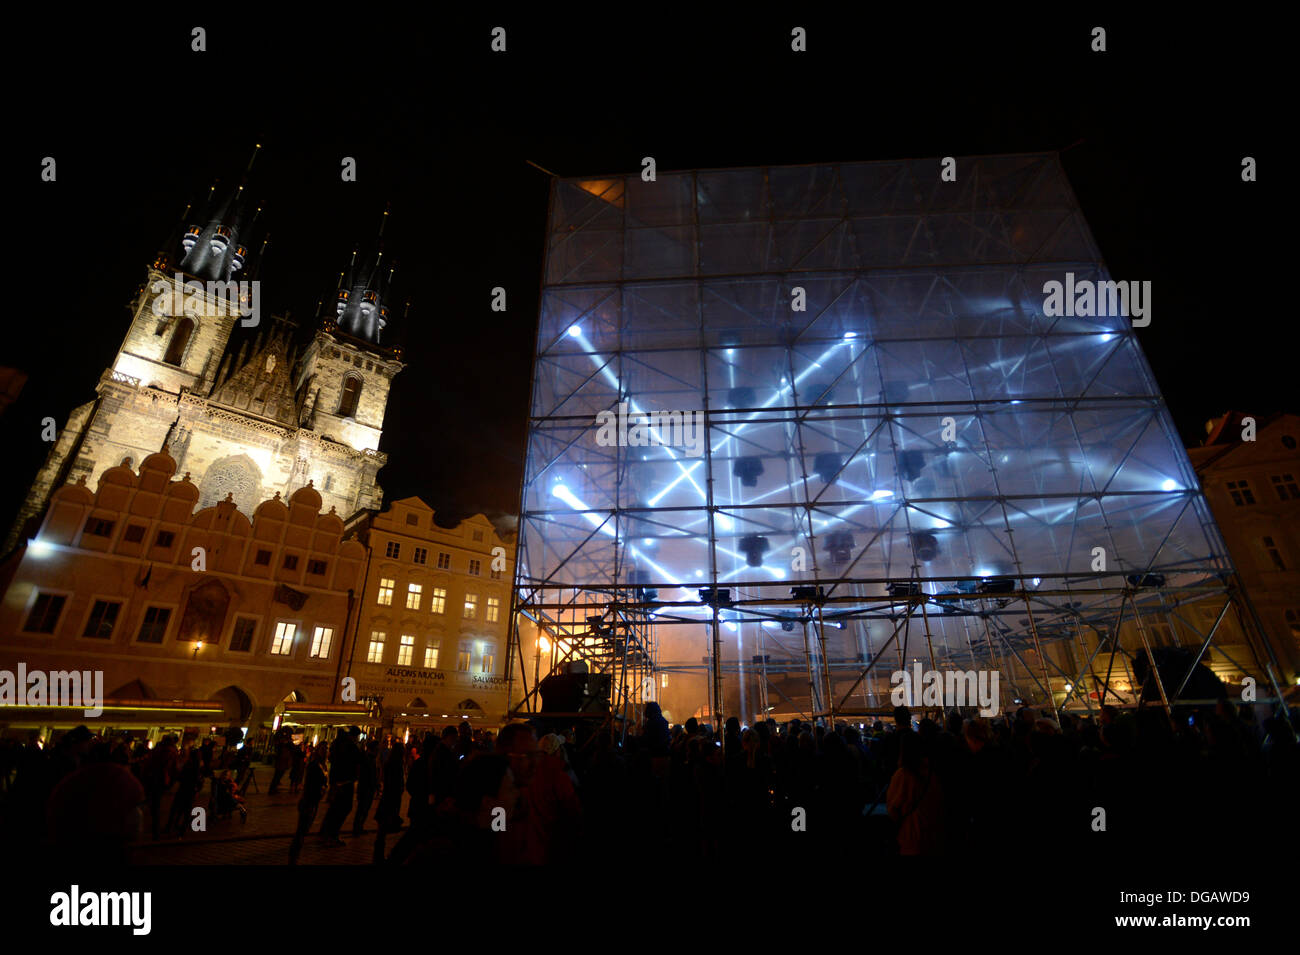 Prague, Czech Republic. 17th October 2013. The first year of the biggest festival of light in the Czech Republic starts on October 17, 2013. HyperCube by the French architects Pierre Schneider and Francoise Wunschel pictured on Old Town Square in Prague. (CTK Photo/Michal Krumphanzl/Alamy Live News) Stock Photo